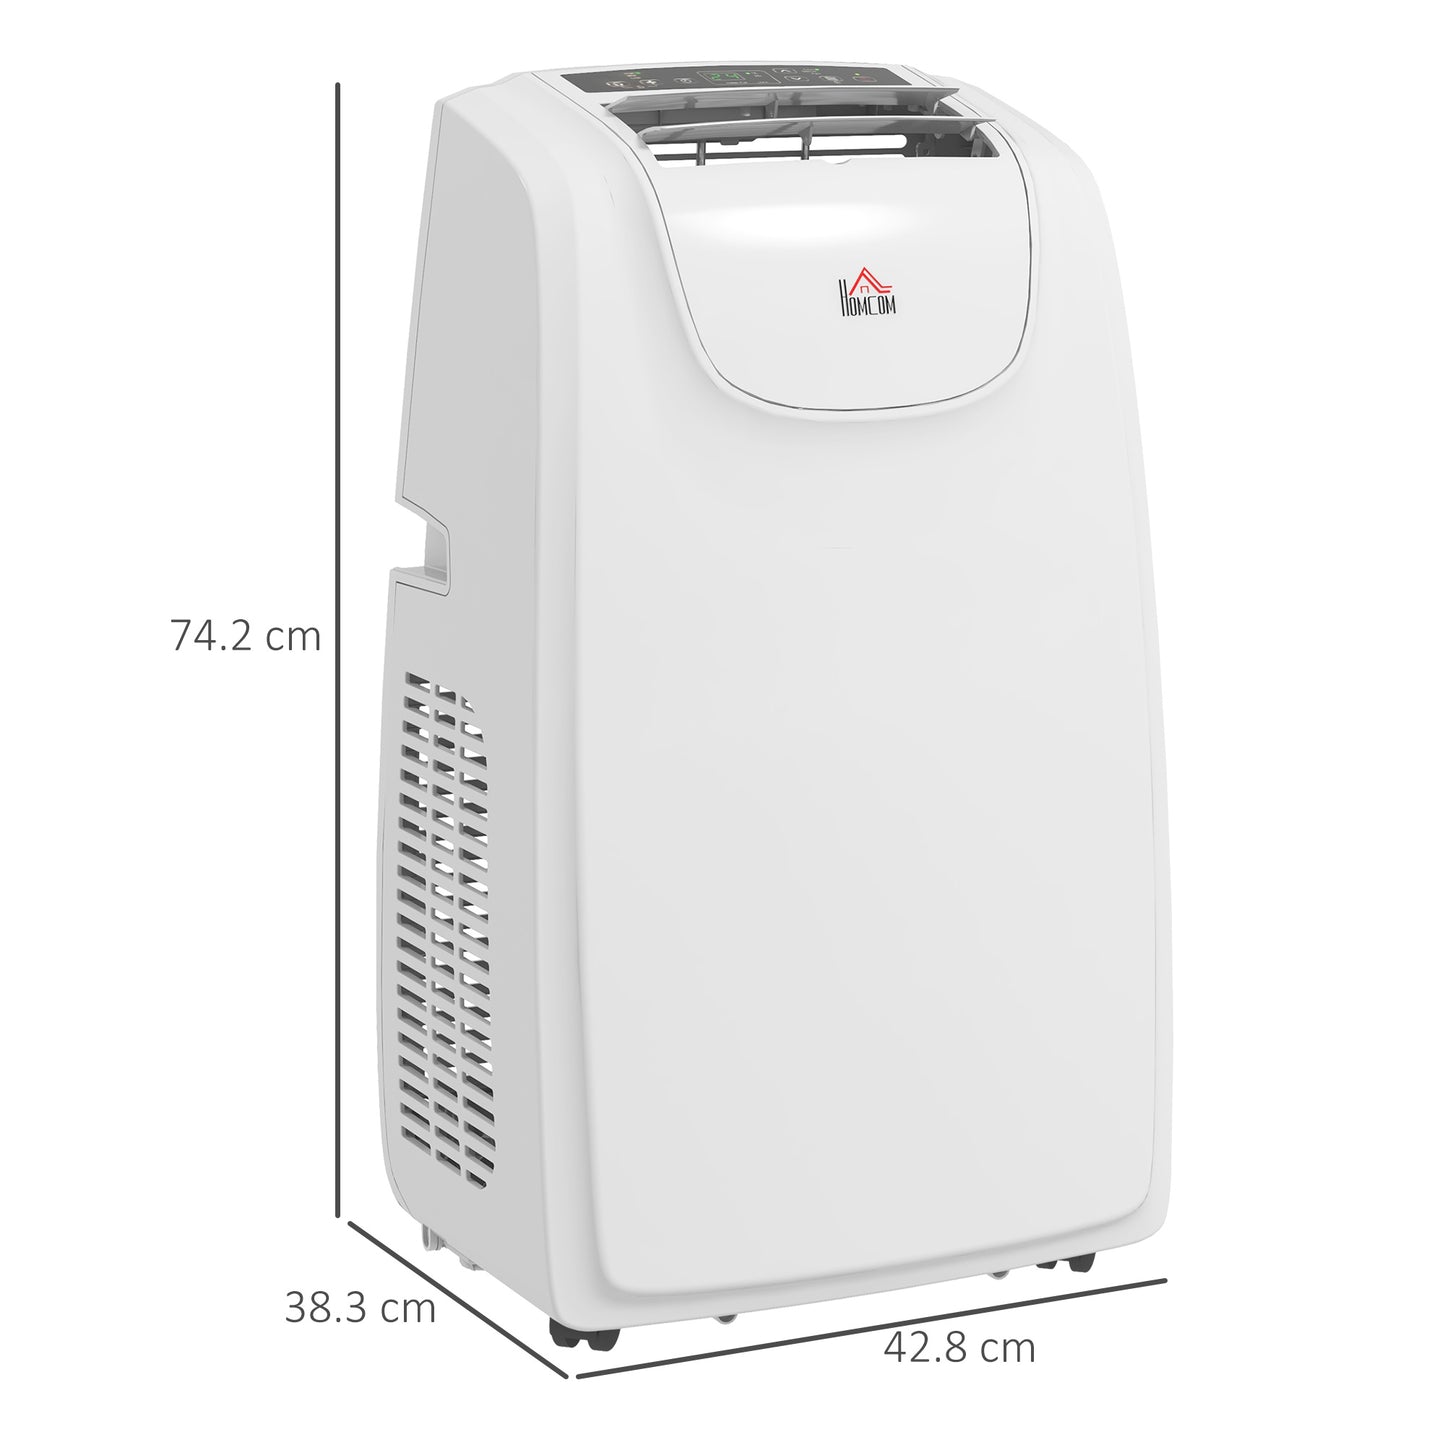 HOMCOM 12,000 BTU Mobile Air Conditioner for Room up to 28m², with Dehumidifier, Quiet Mode, 24H Timer, Wheels, Child Lock